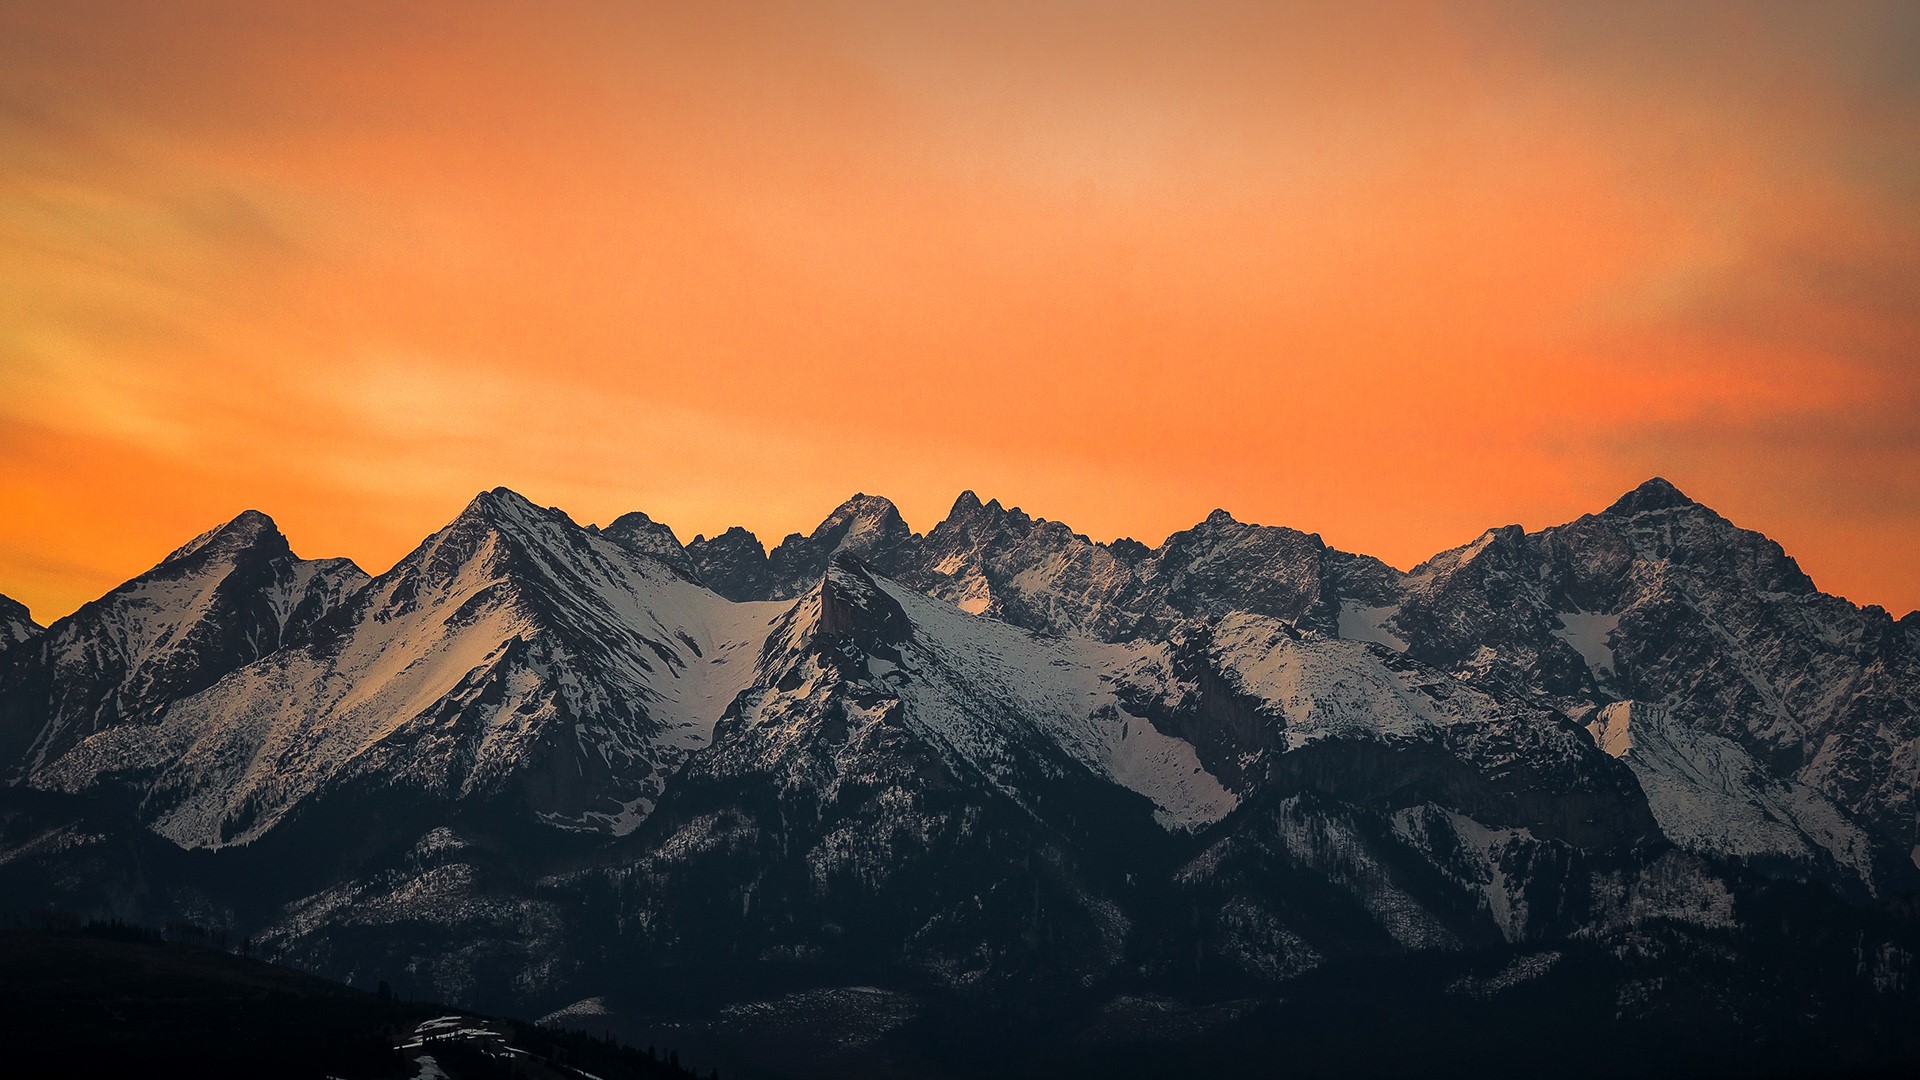 General 1920x1080 nature landscape mountains sky clouds sunset snowy mountain trees forest snow Poland Tatra Mountains orange